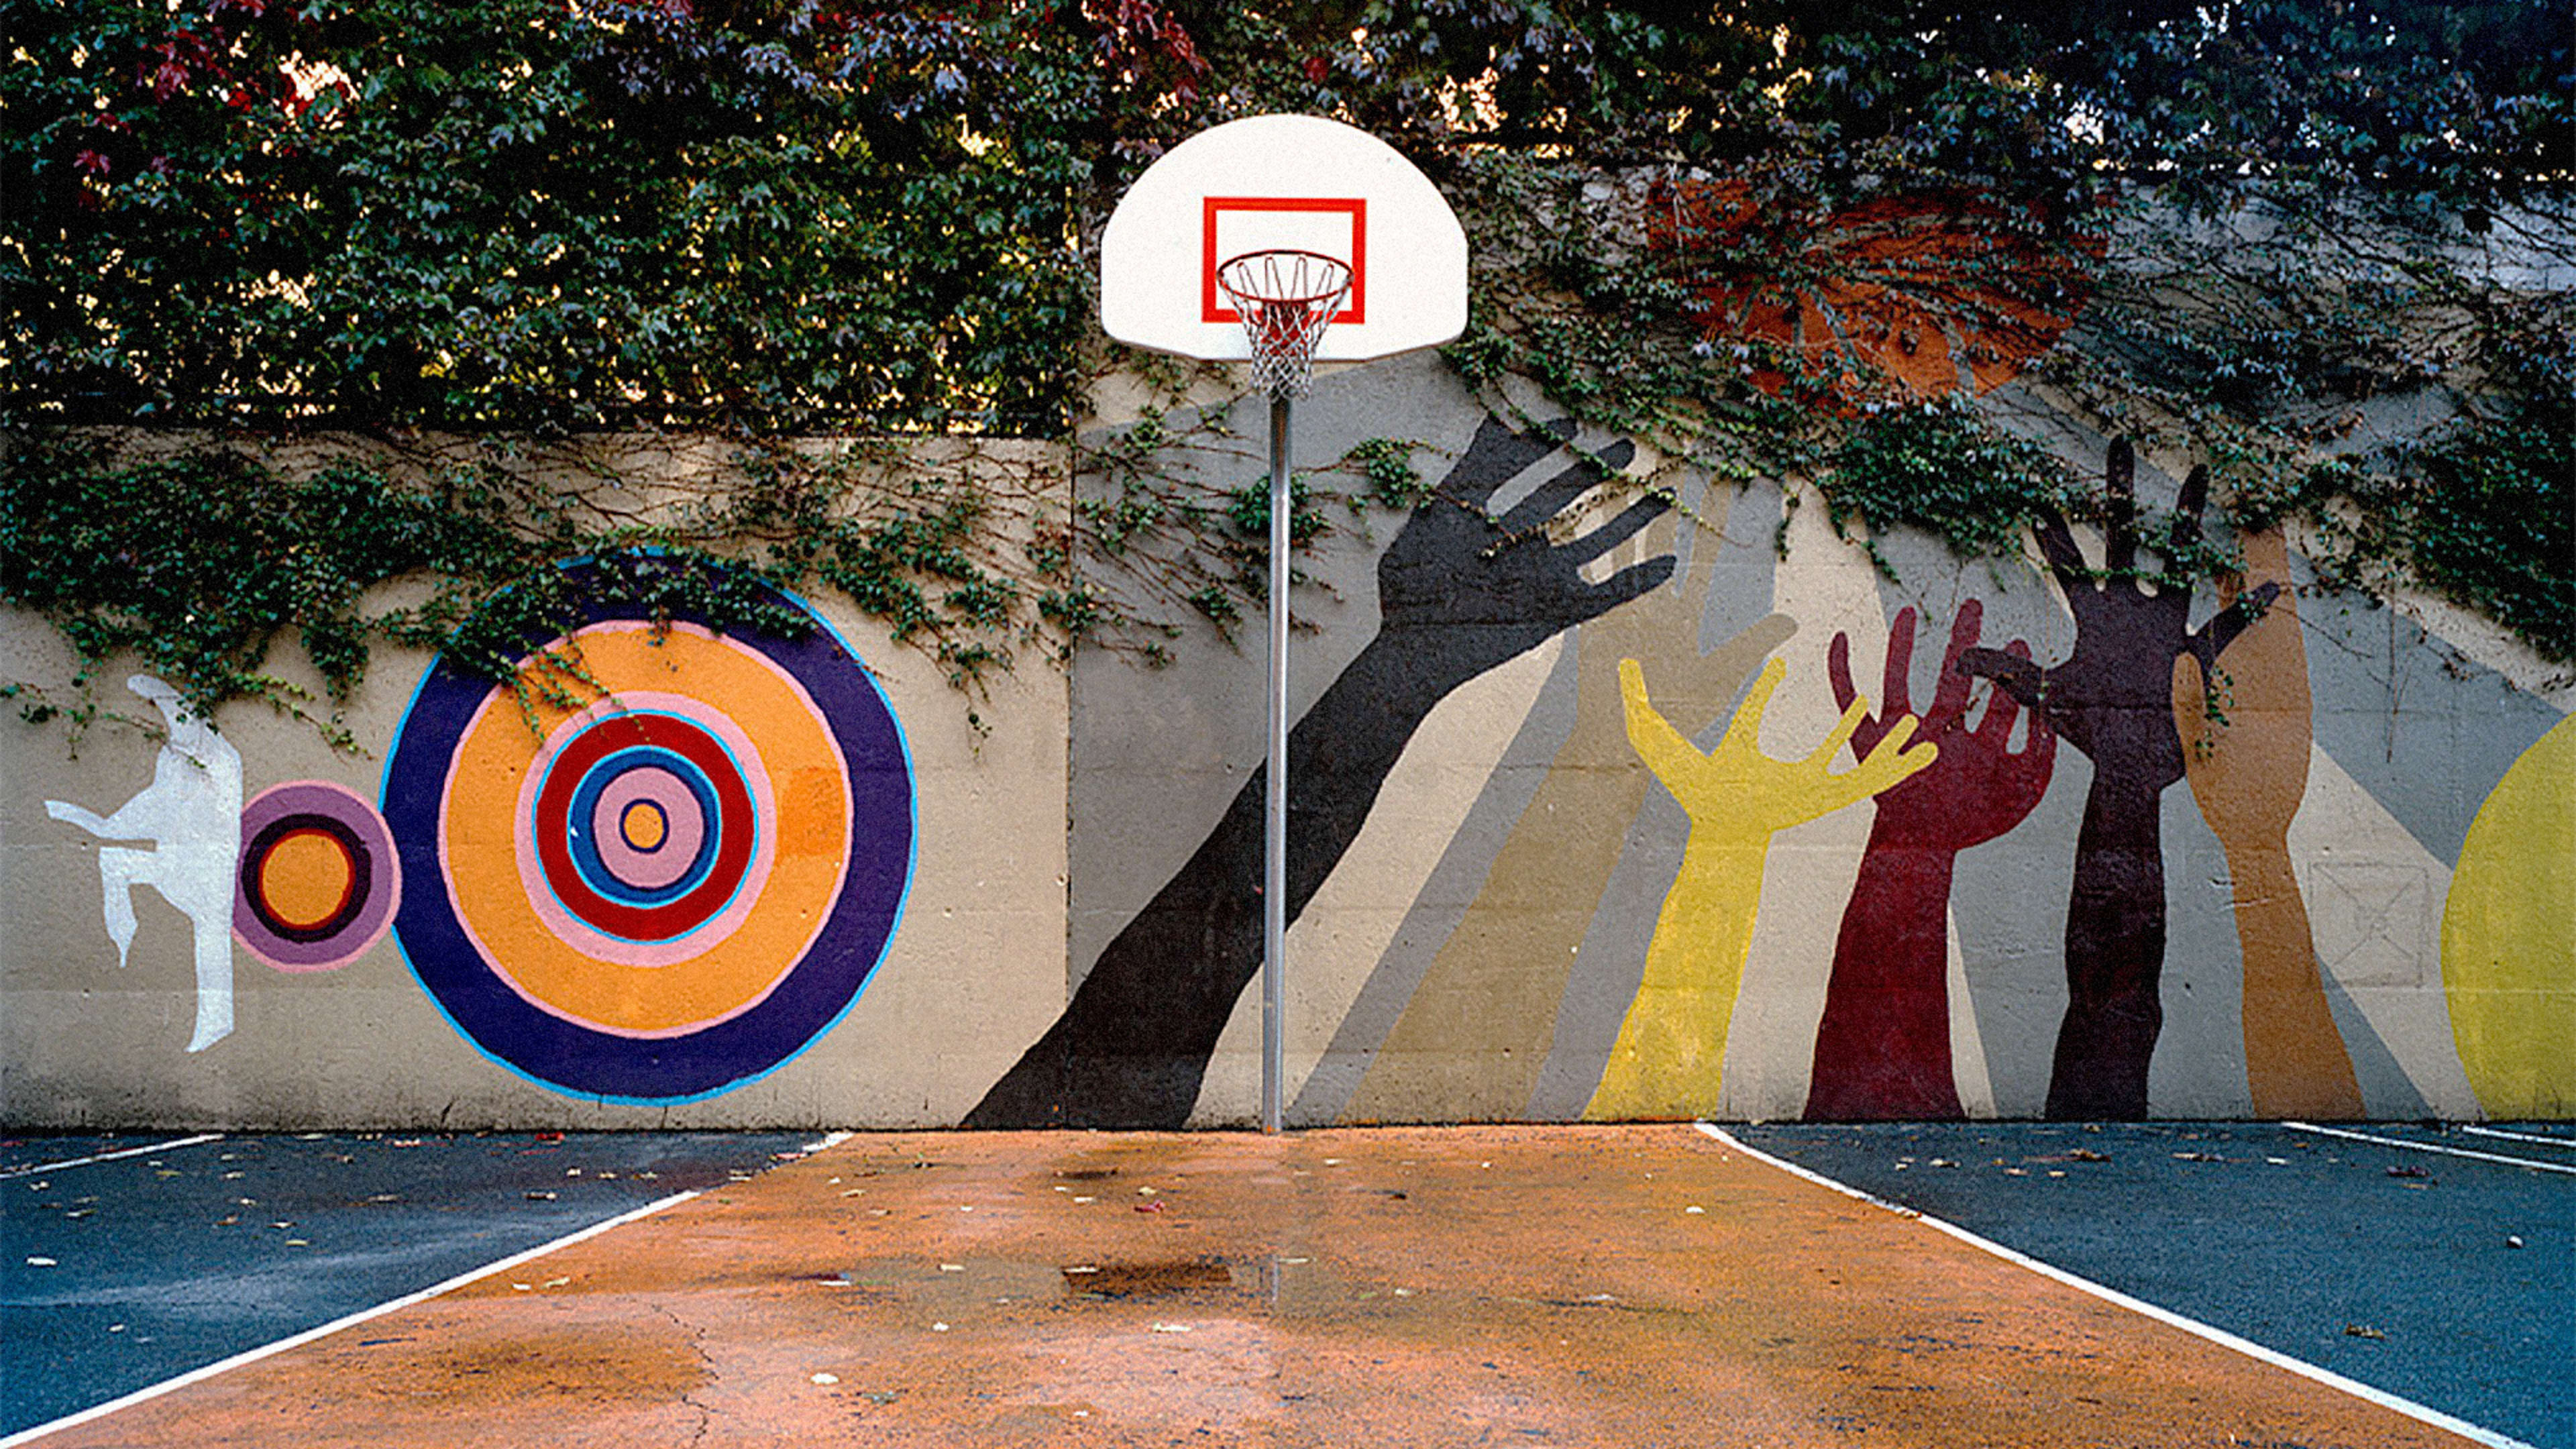 These serene photos of global basketball hoops take you on a trip around the world